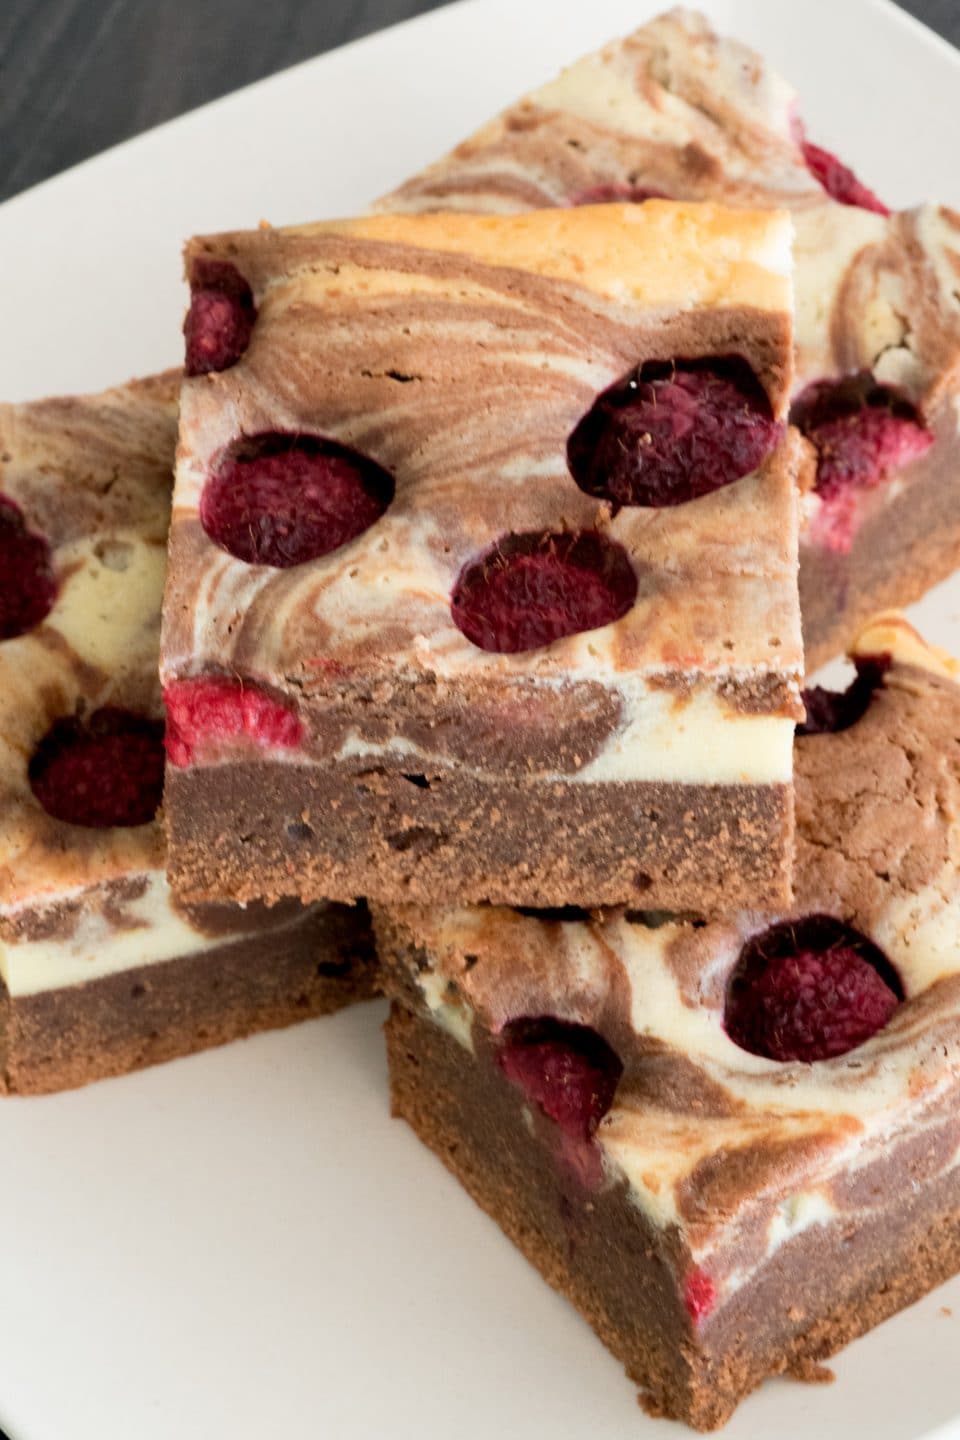 Cheesecake Brownies with Raspberries or other Fruits